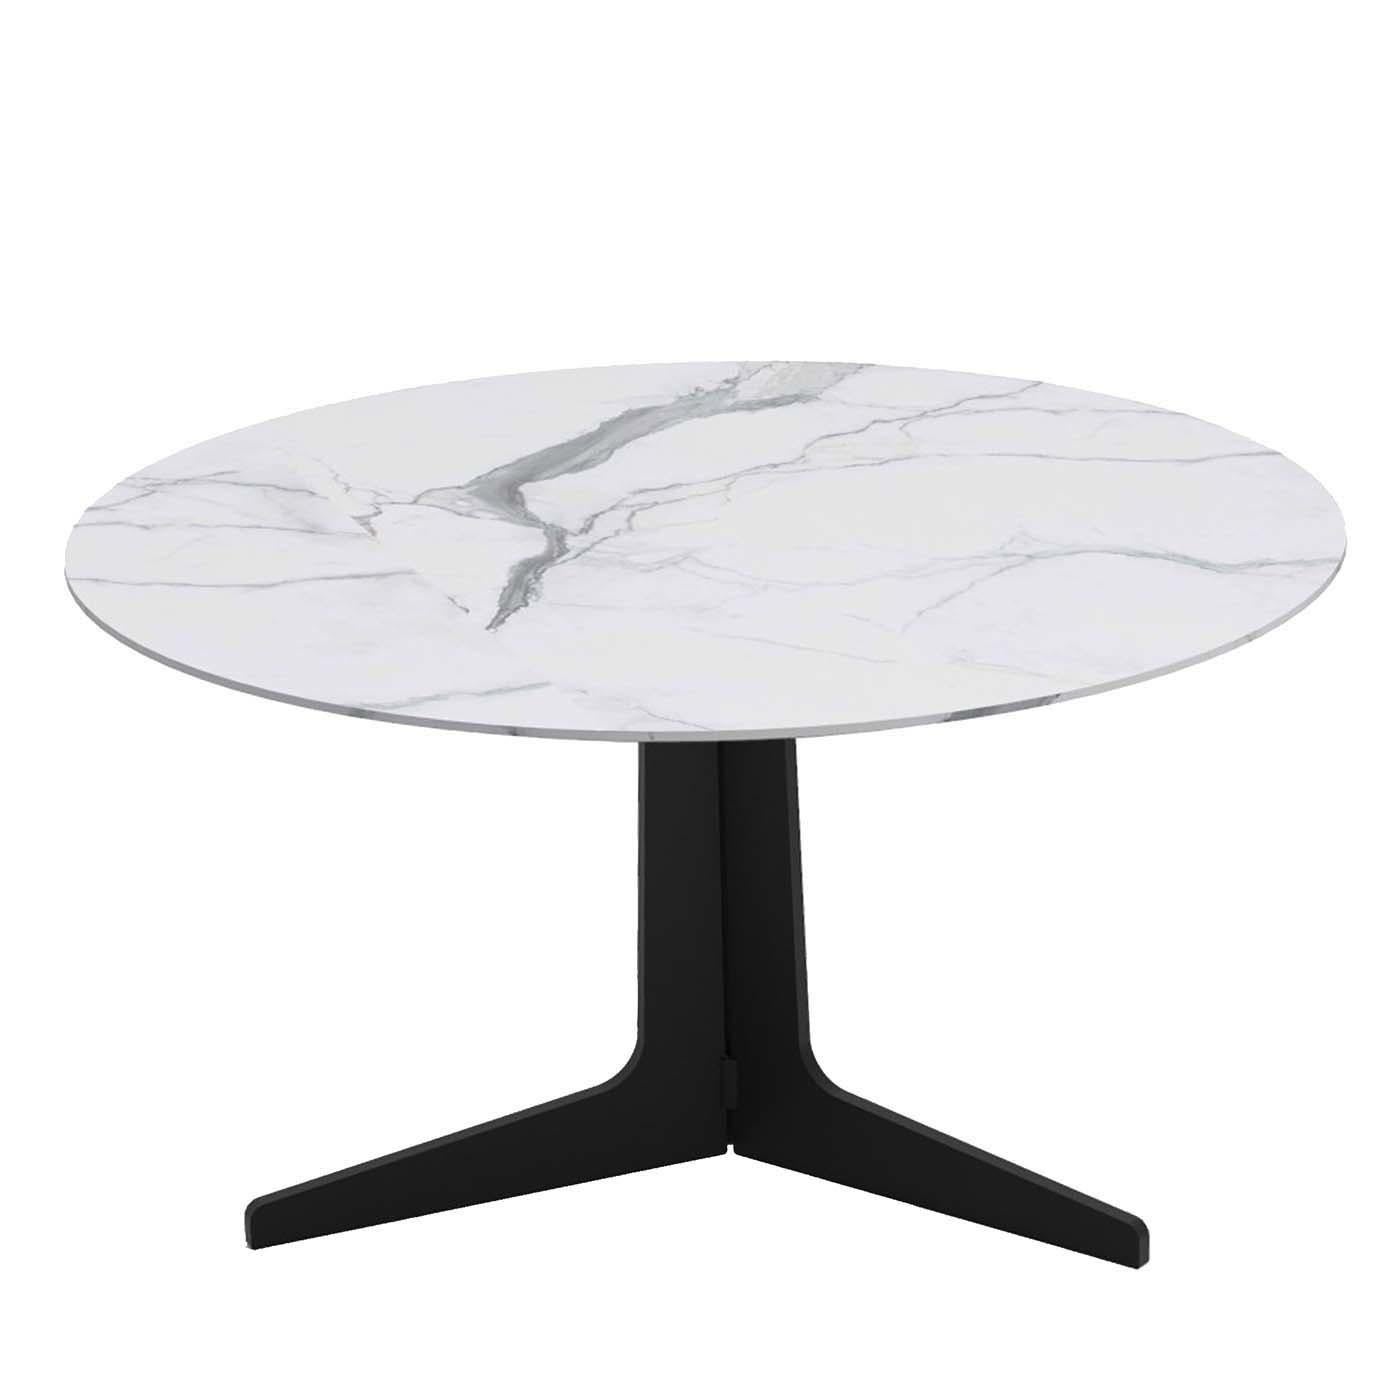 An exquisite combination of textures and materials, this stunning coffee table is an example of refined, impeccable craftsmanship. Resting on a metal base with a matte pewter finish, it features a sturdy, sustaining tripod, with a circular top (Ã˜60